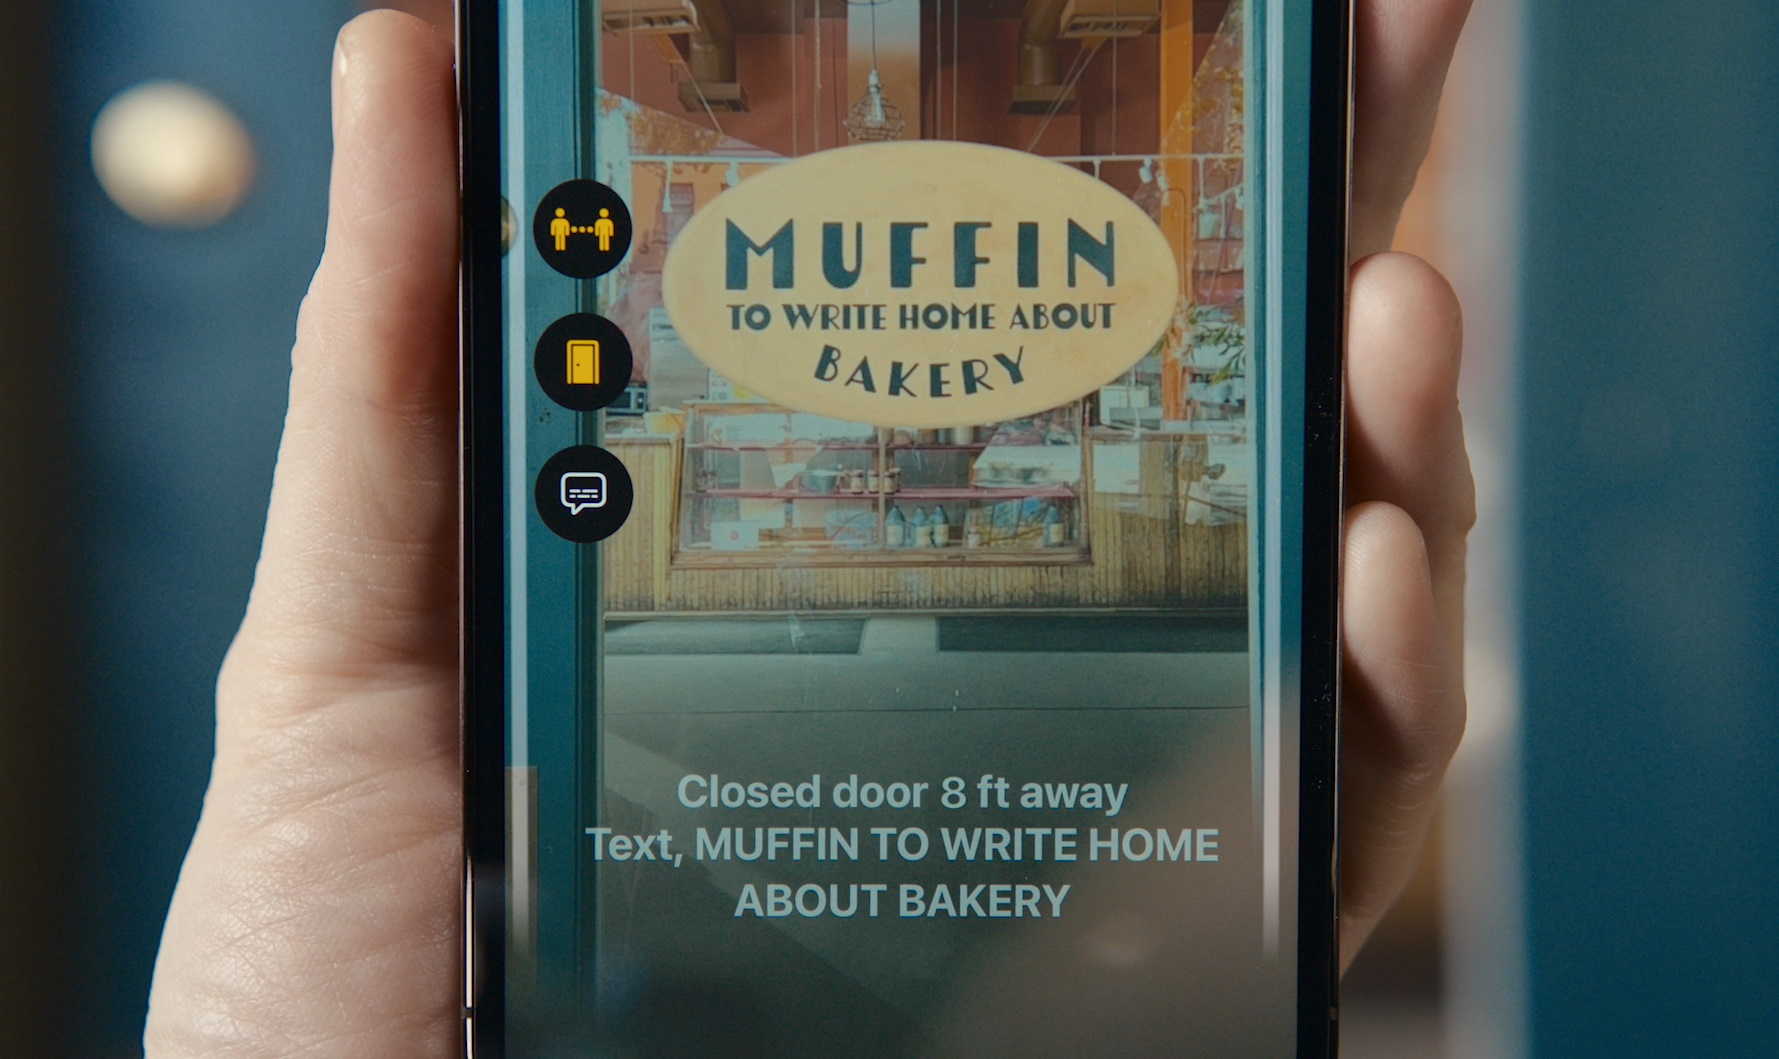 Image of a phone showing information about a door it sees: "Muffin to write home about bakery"